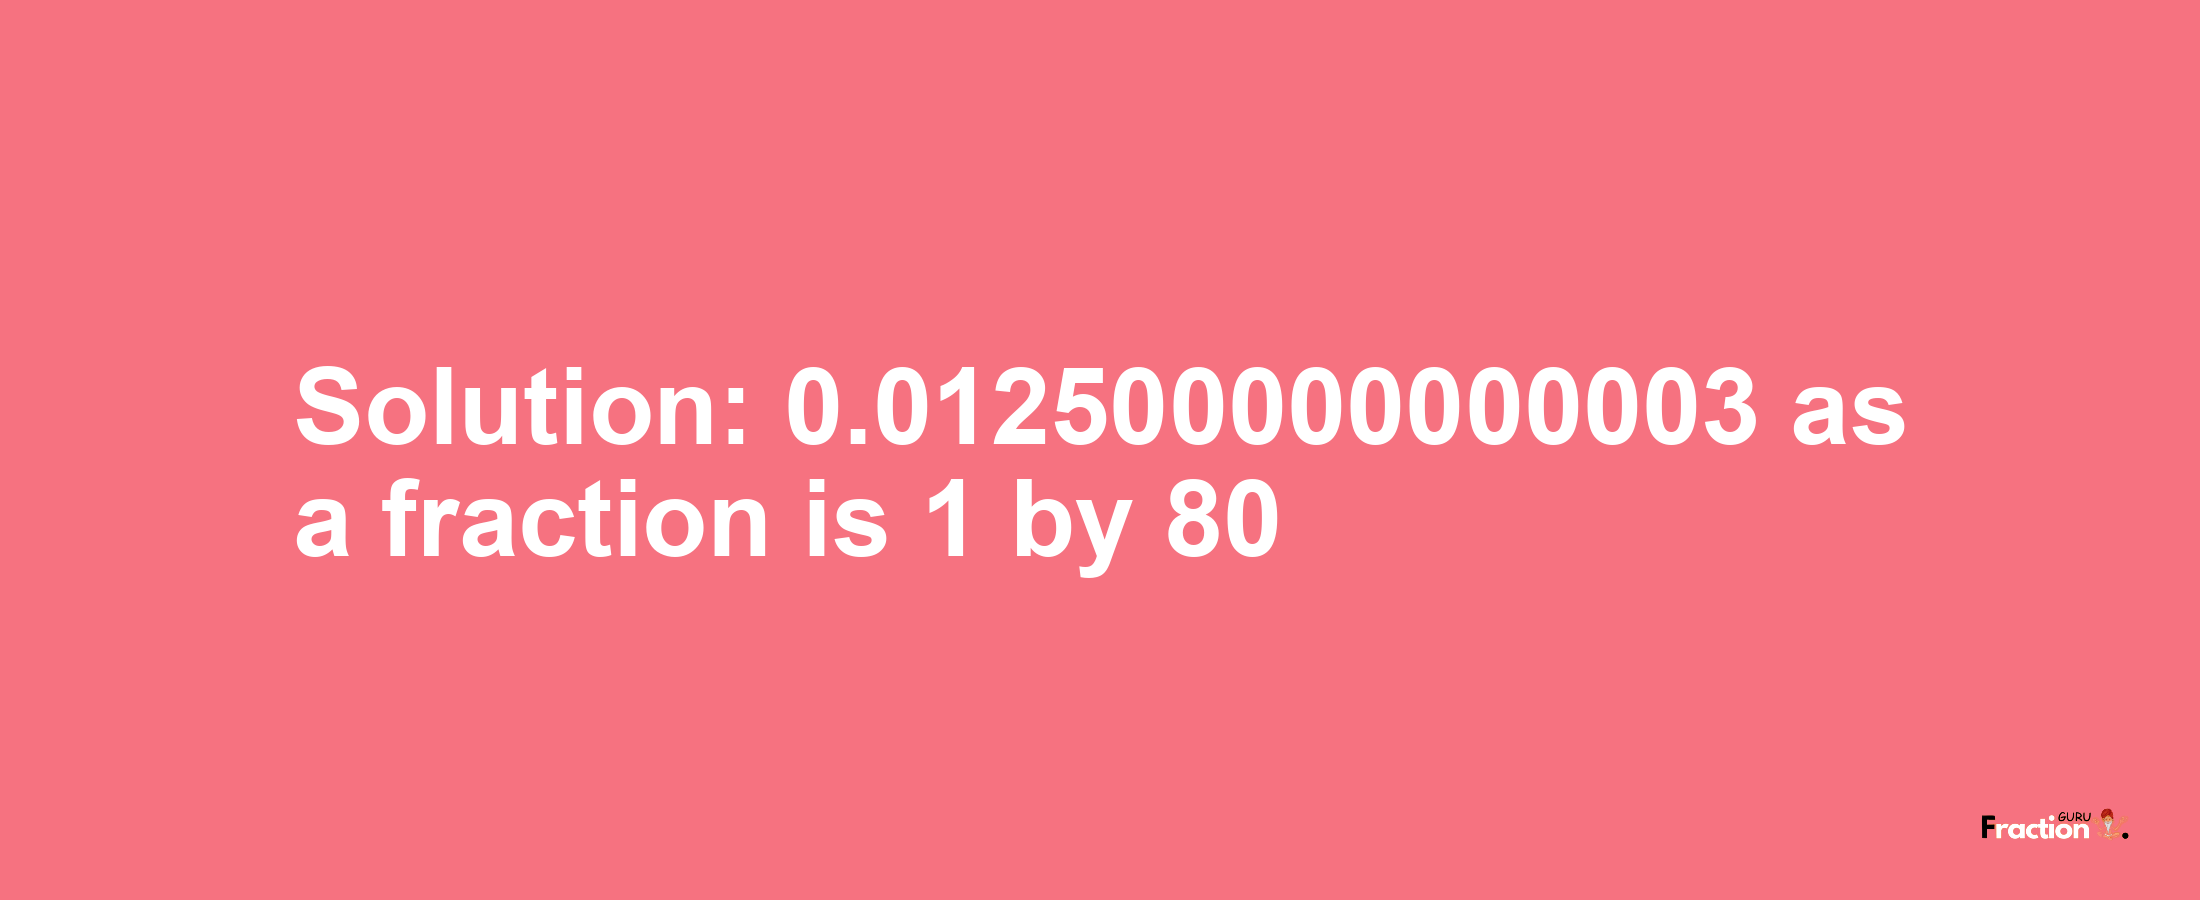 Solution:0.012500000000003 as a fraction is 1/80